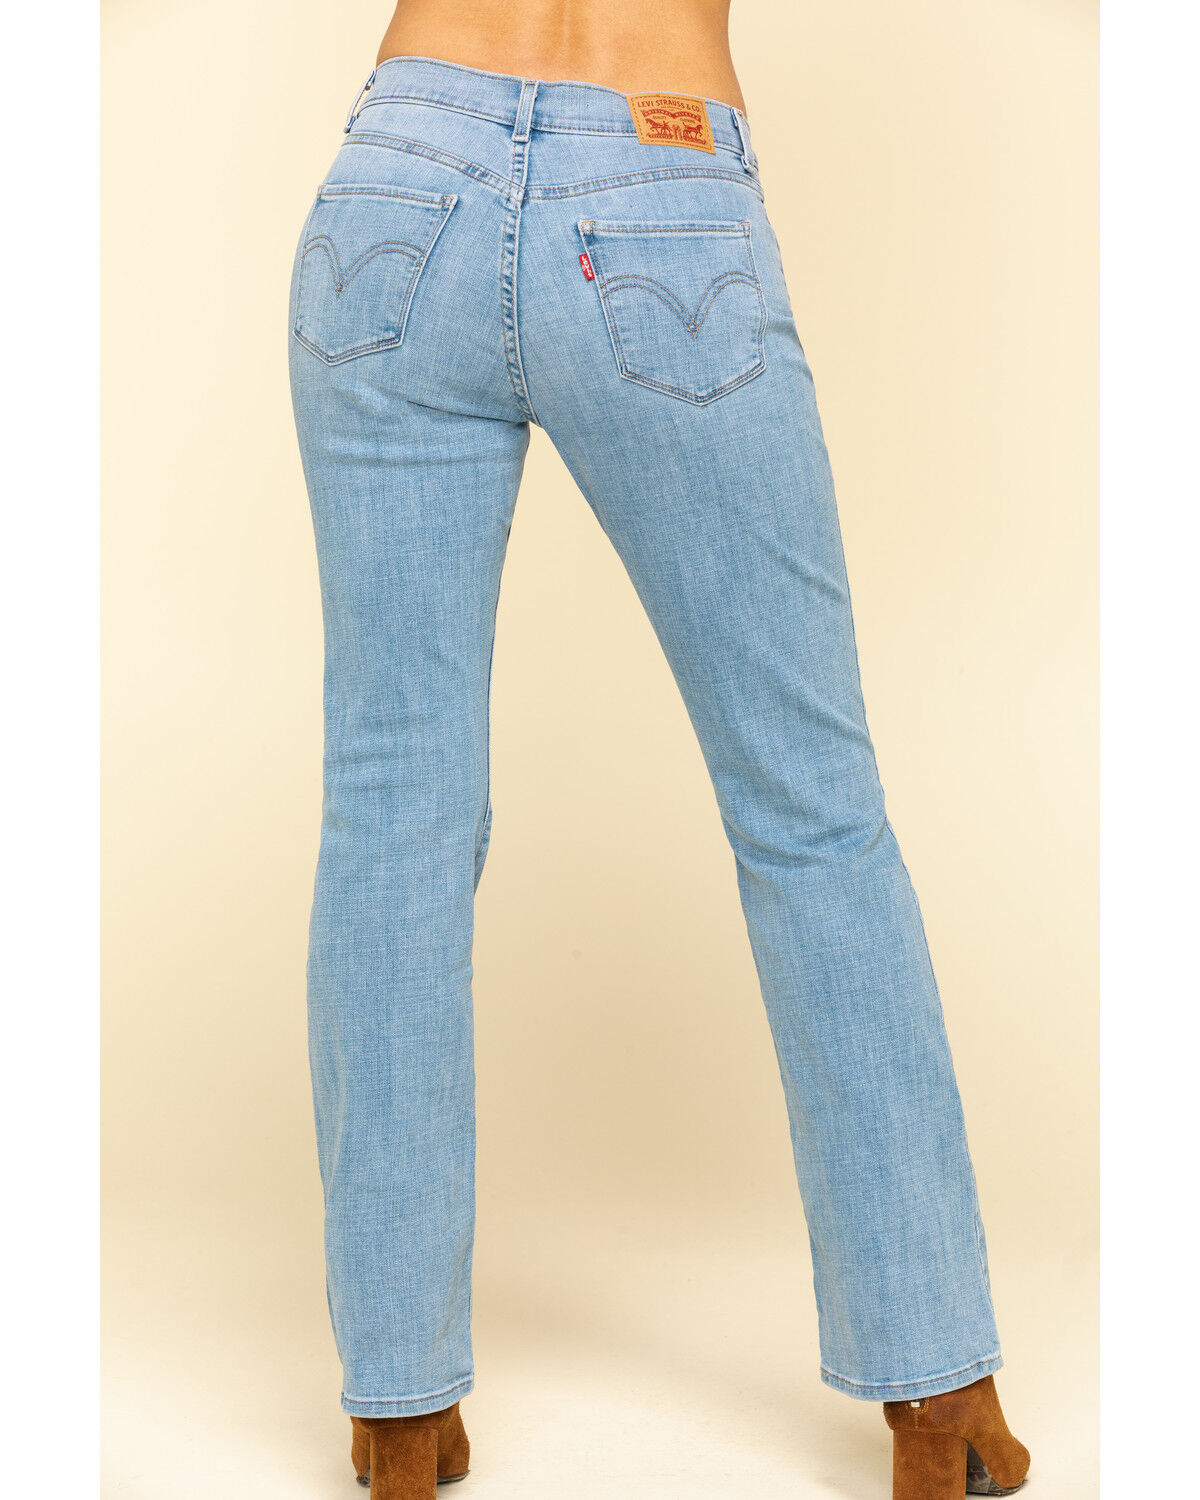 Classic Light Wash Bootcut Jeans 